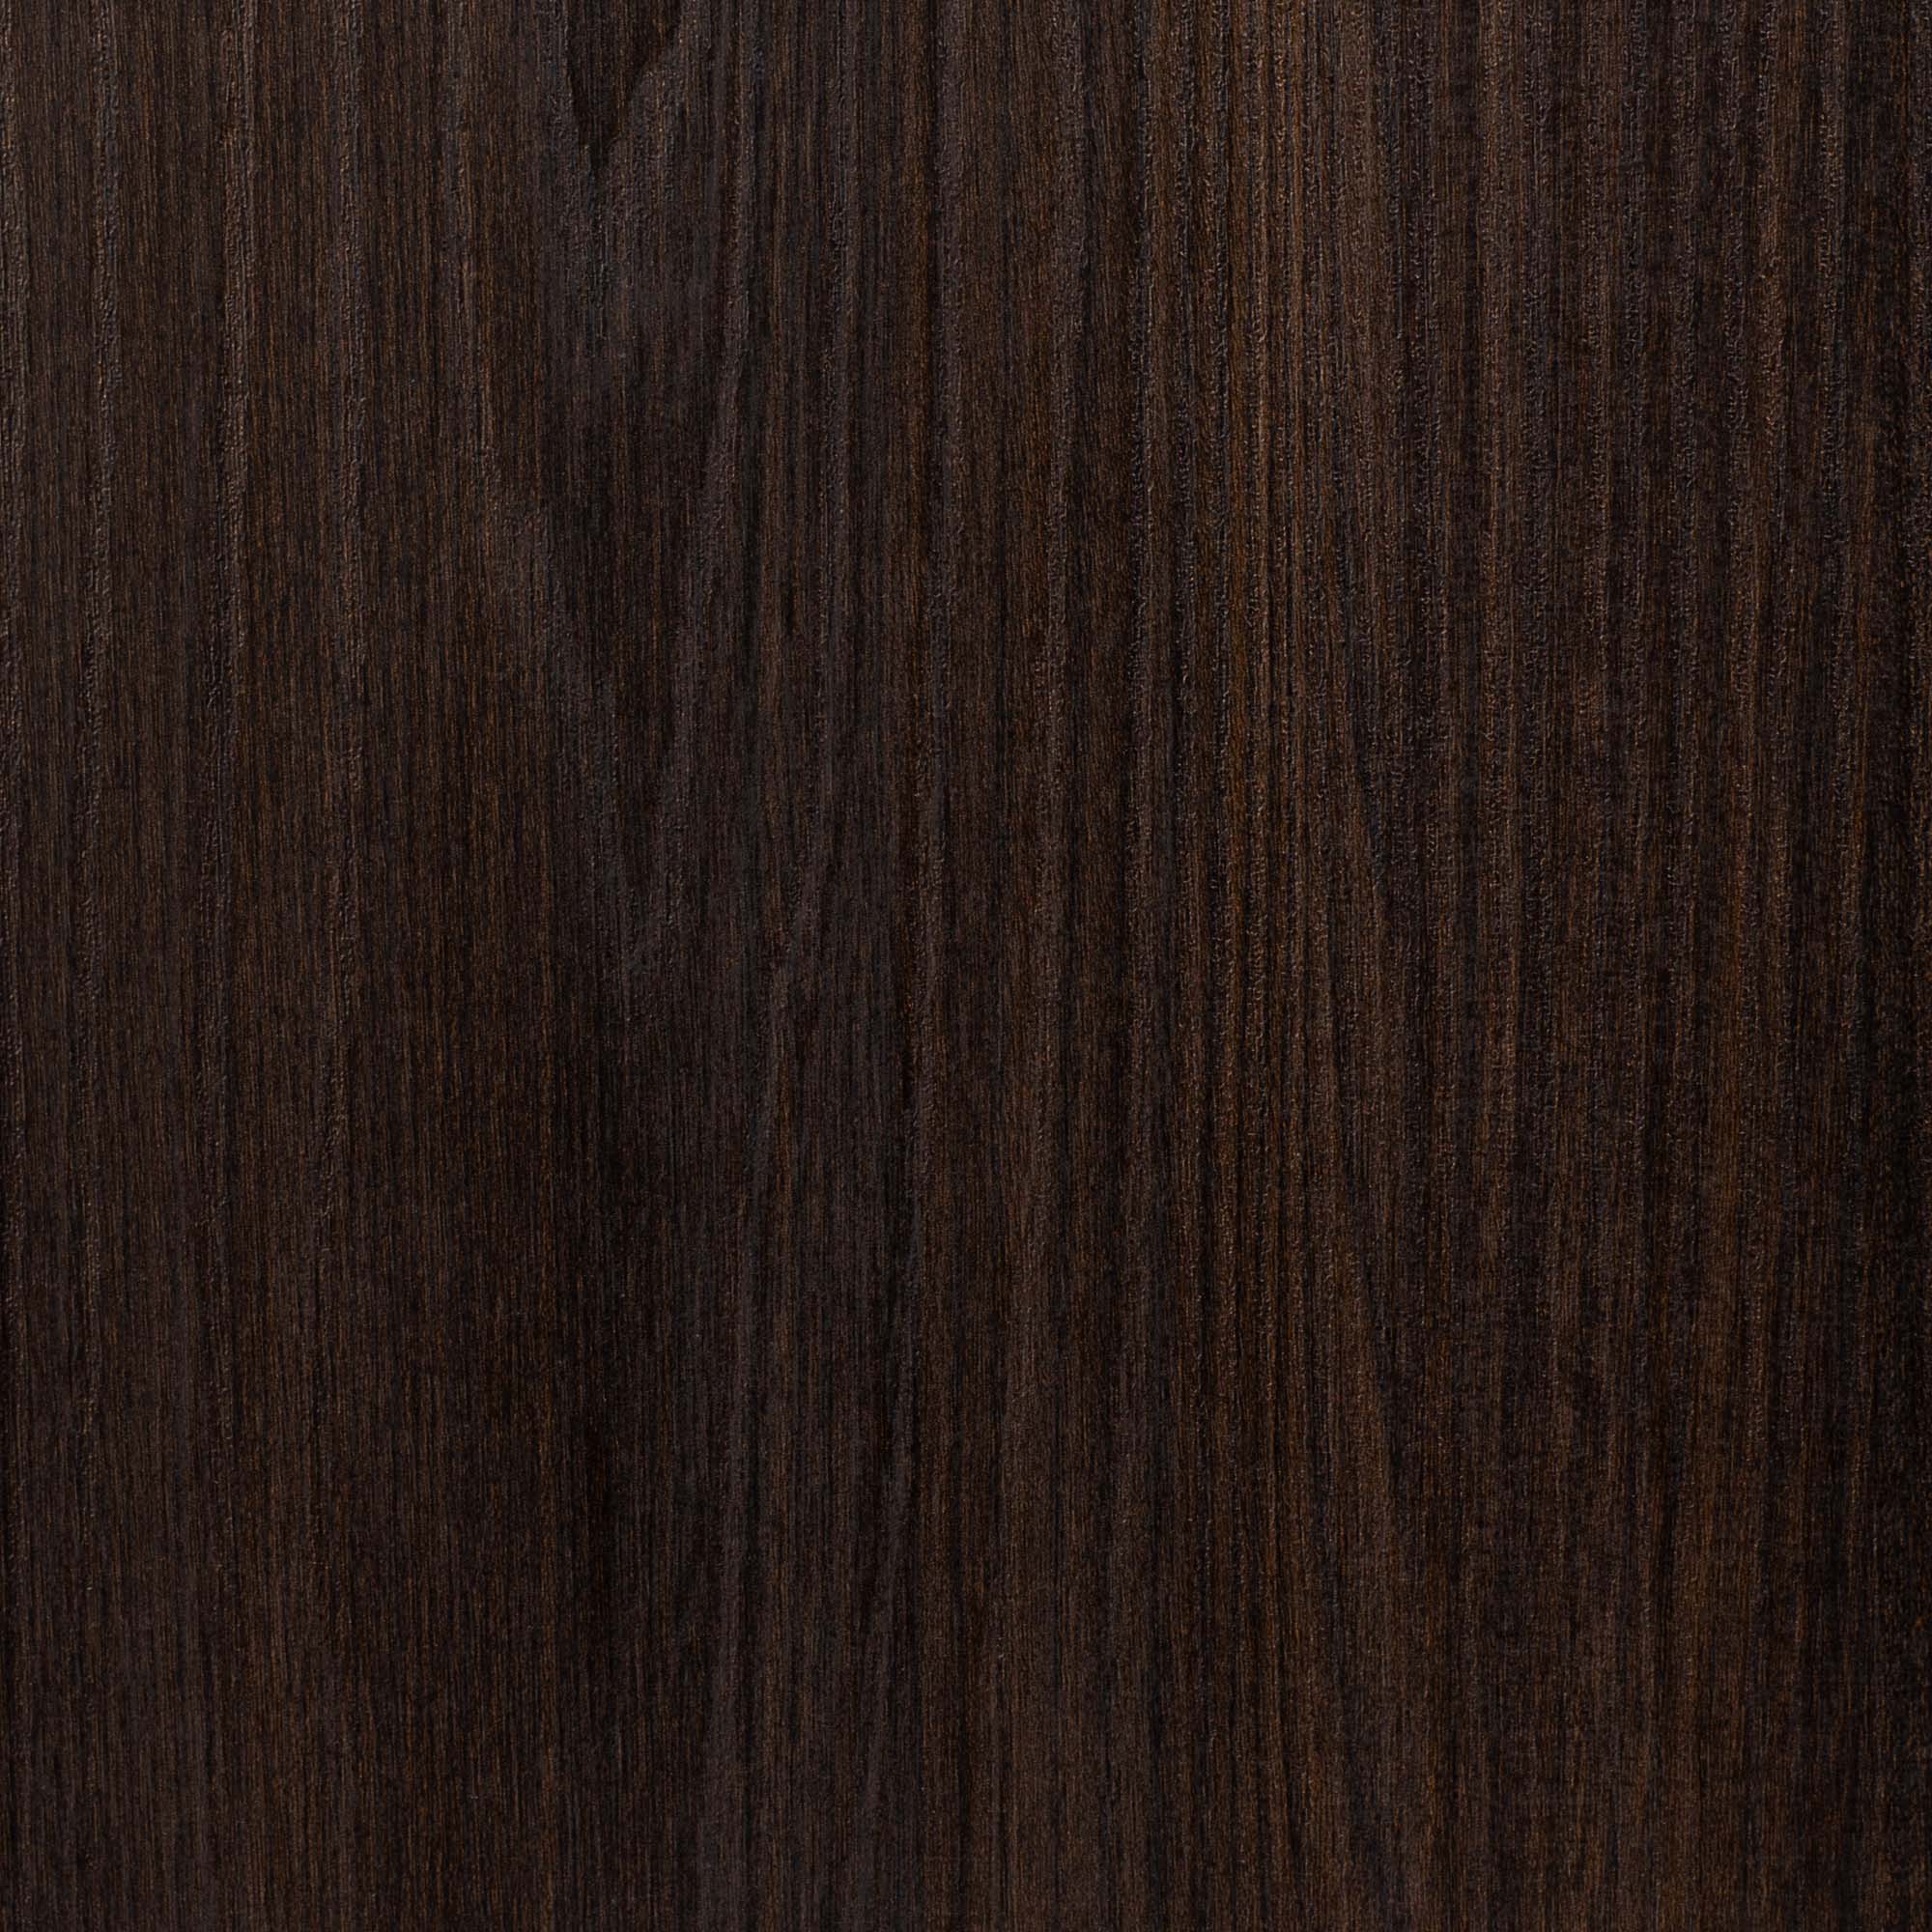 Mod Cabinetry Euro Line Textura Olmo 3 texture